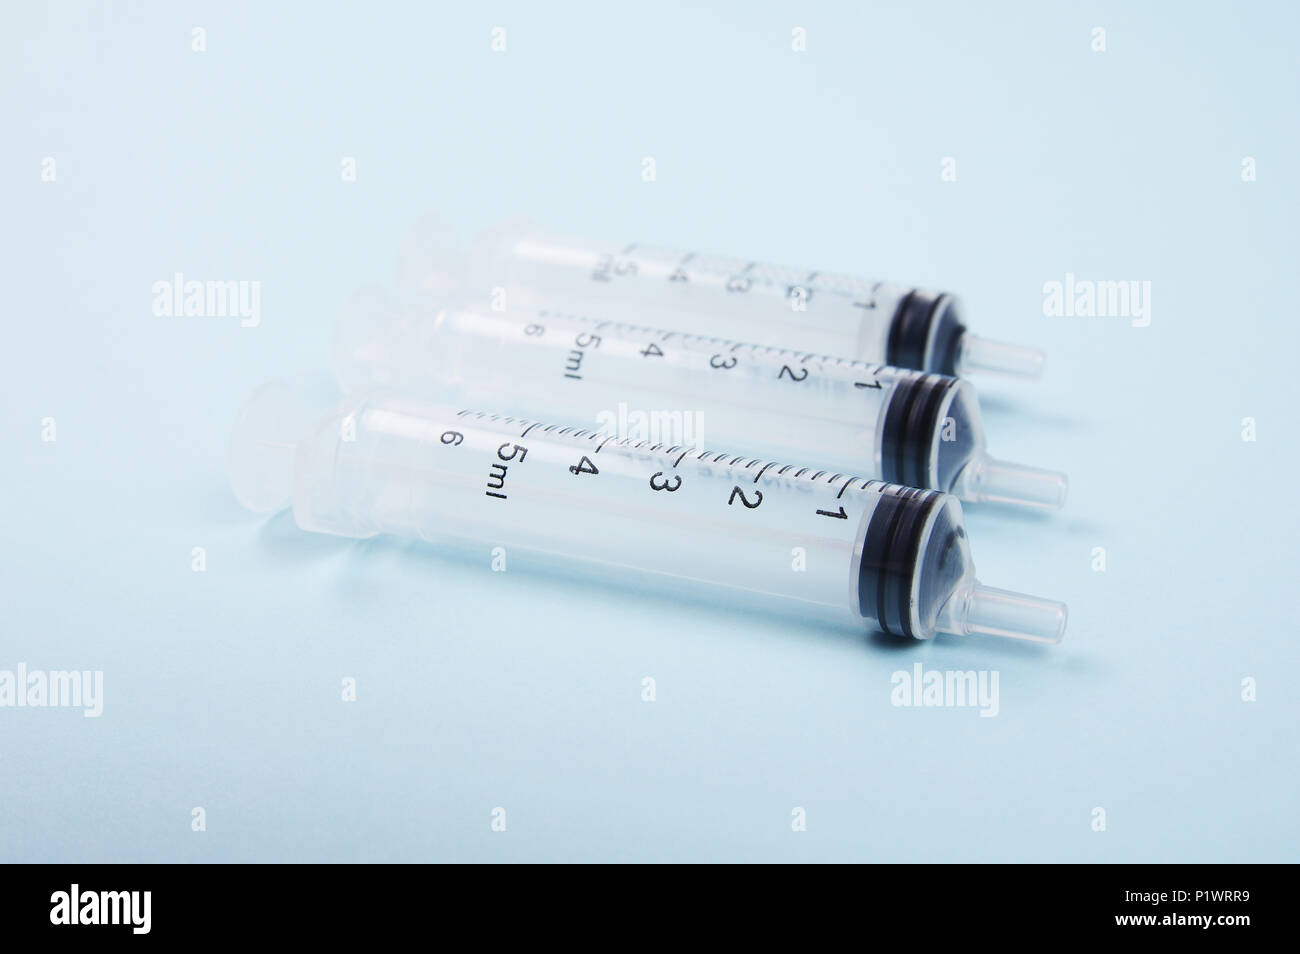 three clear plastic medical syringes in a neat row on a light blue background Stock Photo